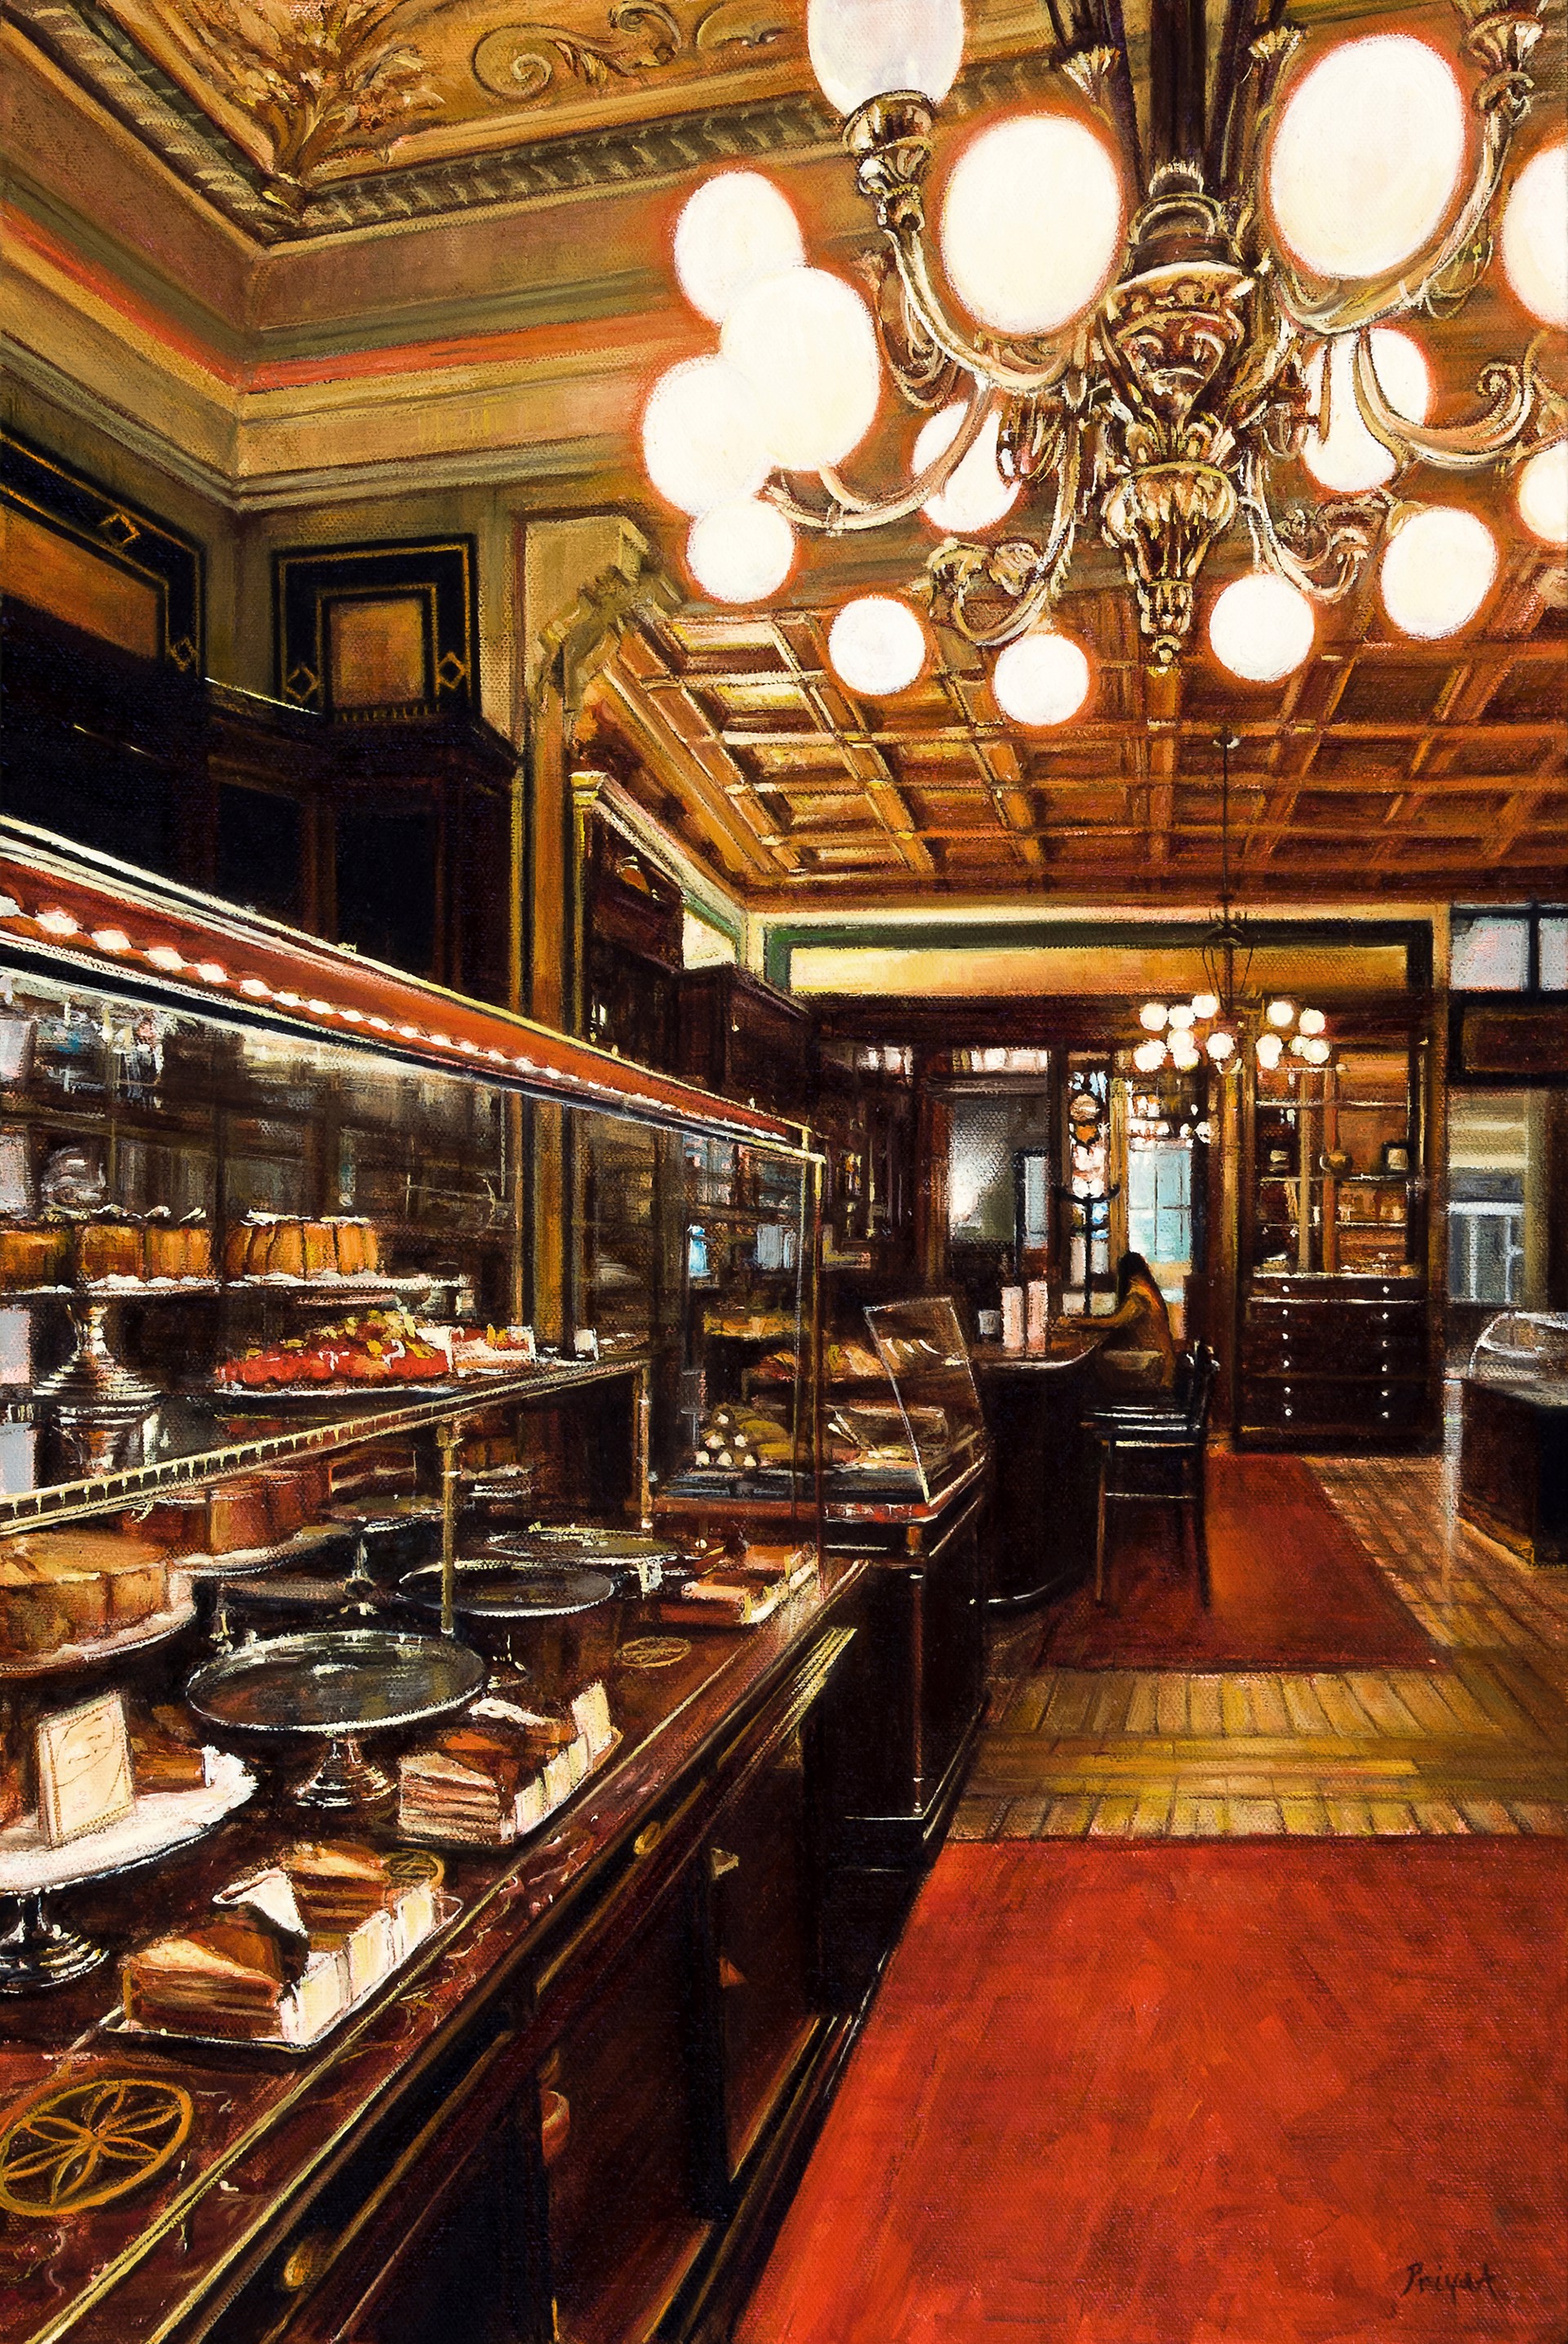 Confections and Coffee at the Demel by Priya Ahlawat